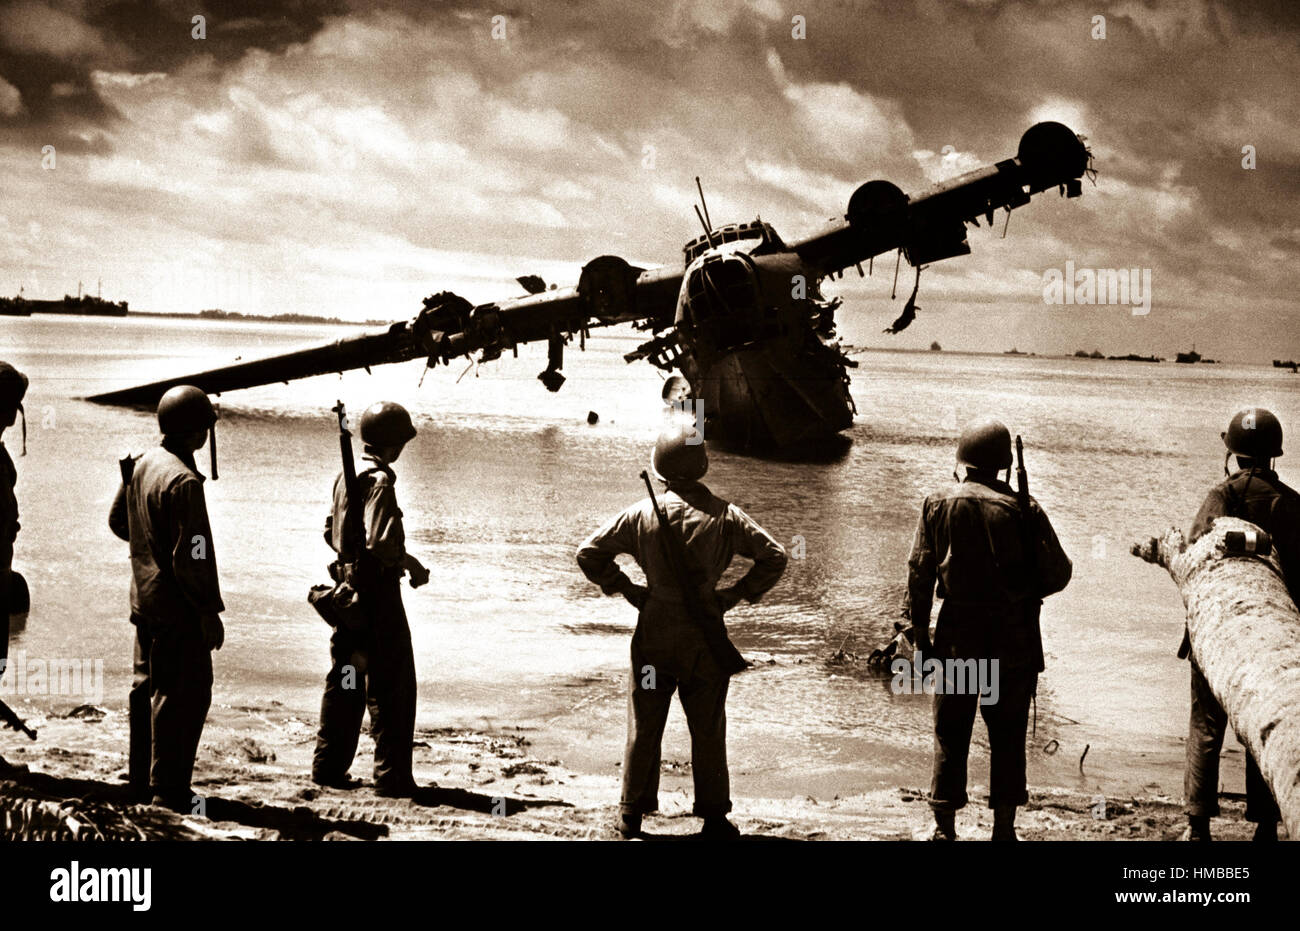 U.S. Army troops pause for a look at a Japanese seaplane during the battle of Makin.  The plane was under repair in the lagoon when the invasion started.  The Japanese used it as a machine gun nest until American fliers took care of it.  November 1943.  (Coast Guard) Exact Date Shot Unknown NARA FILE #:  026-G-3000 WAR & CONFLICT BOOK #:  1320 Stock Photo